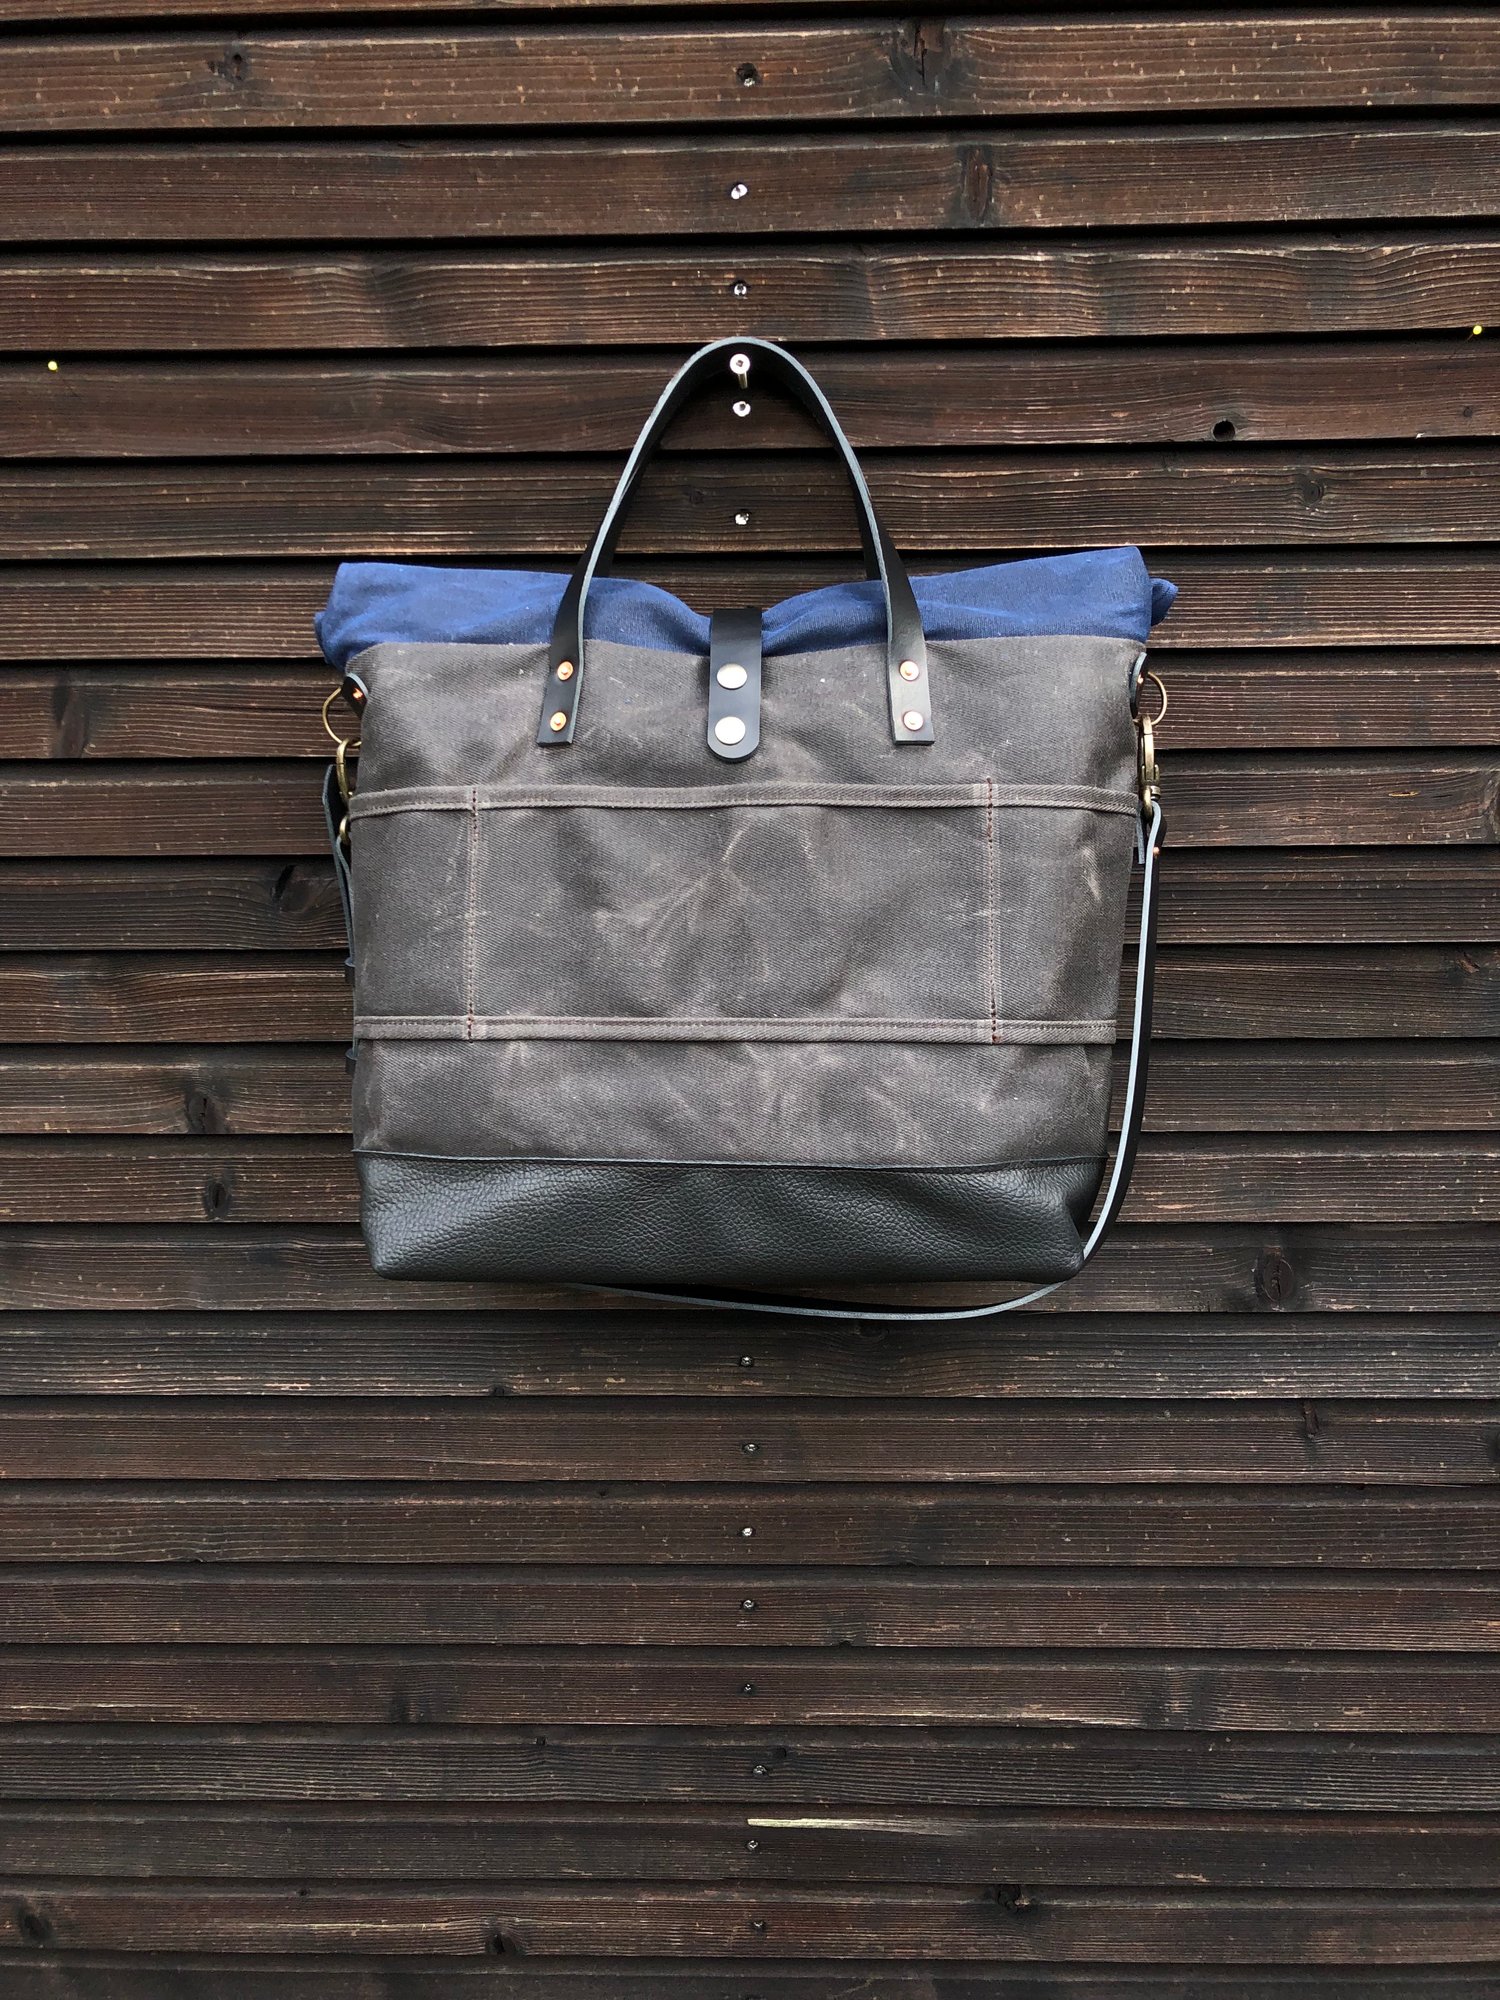 Waxed canvas roll top tote bag with luggage handle attachment